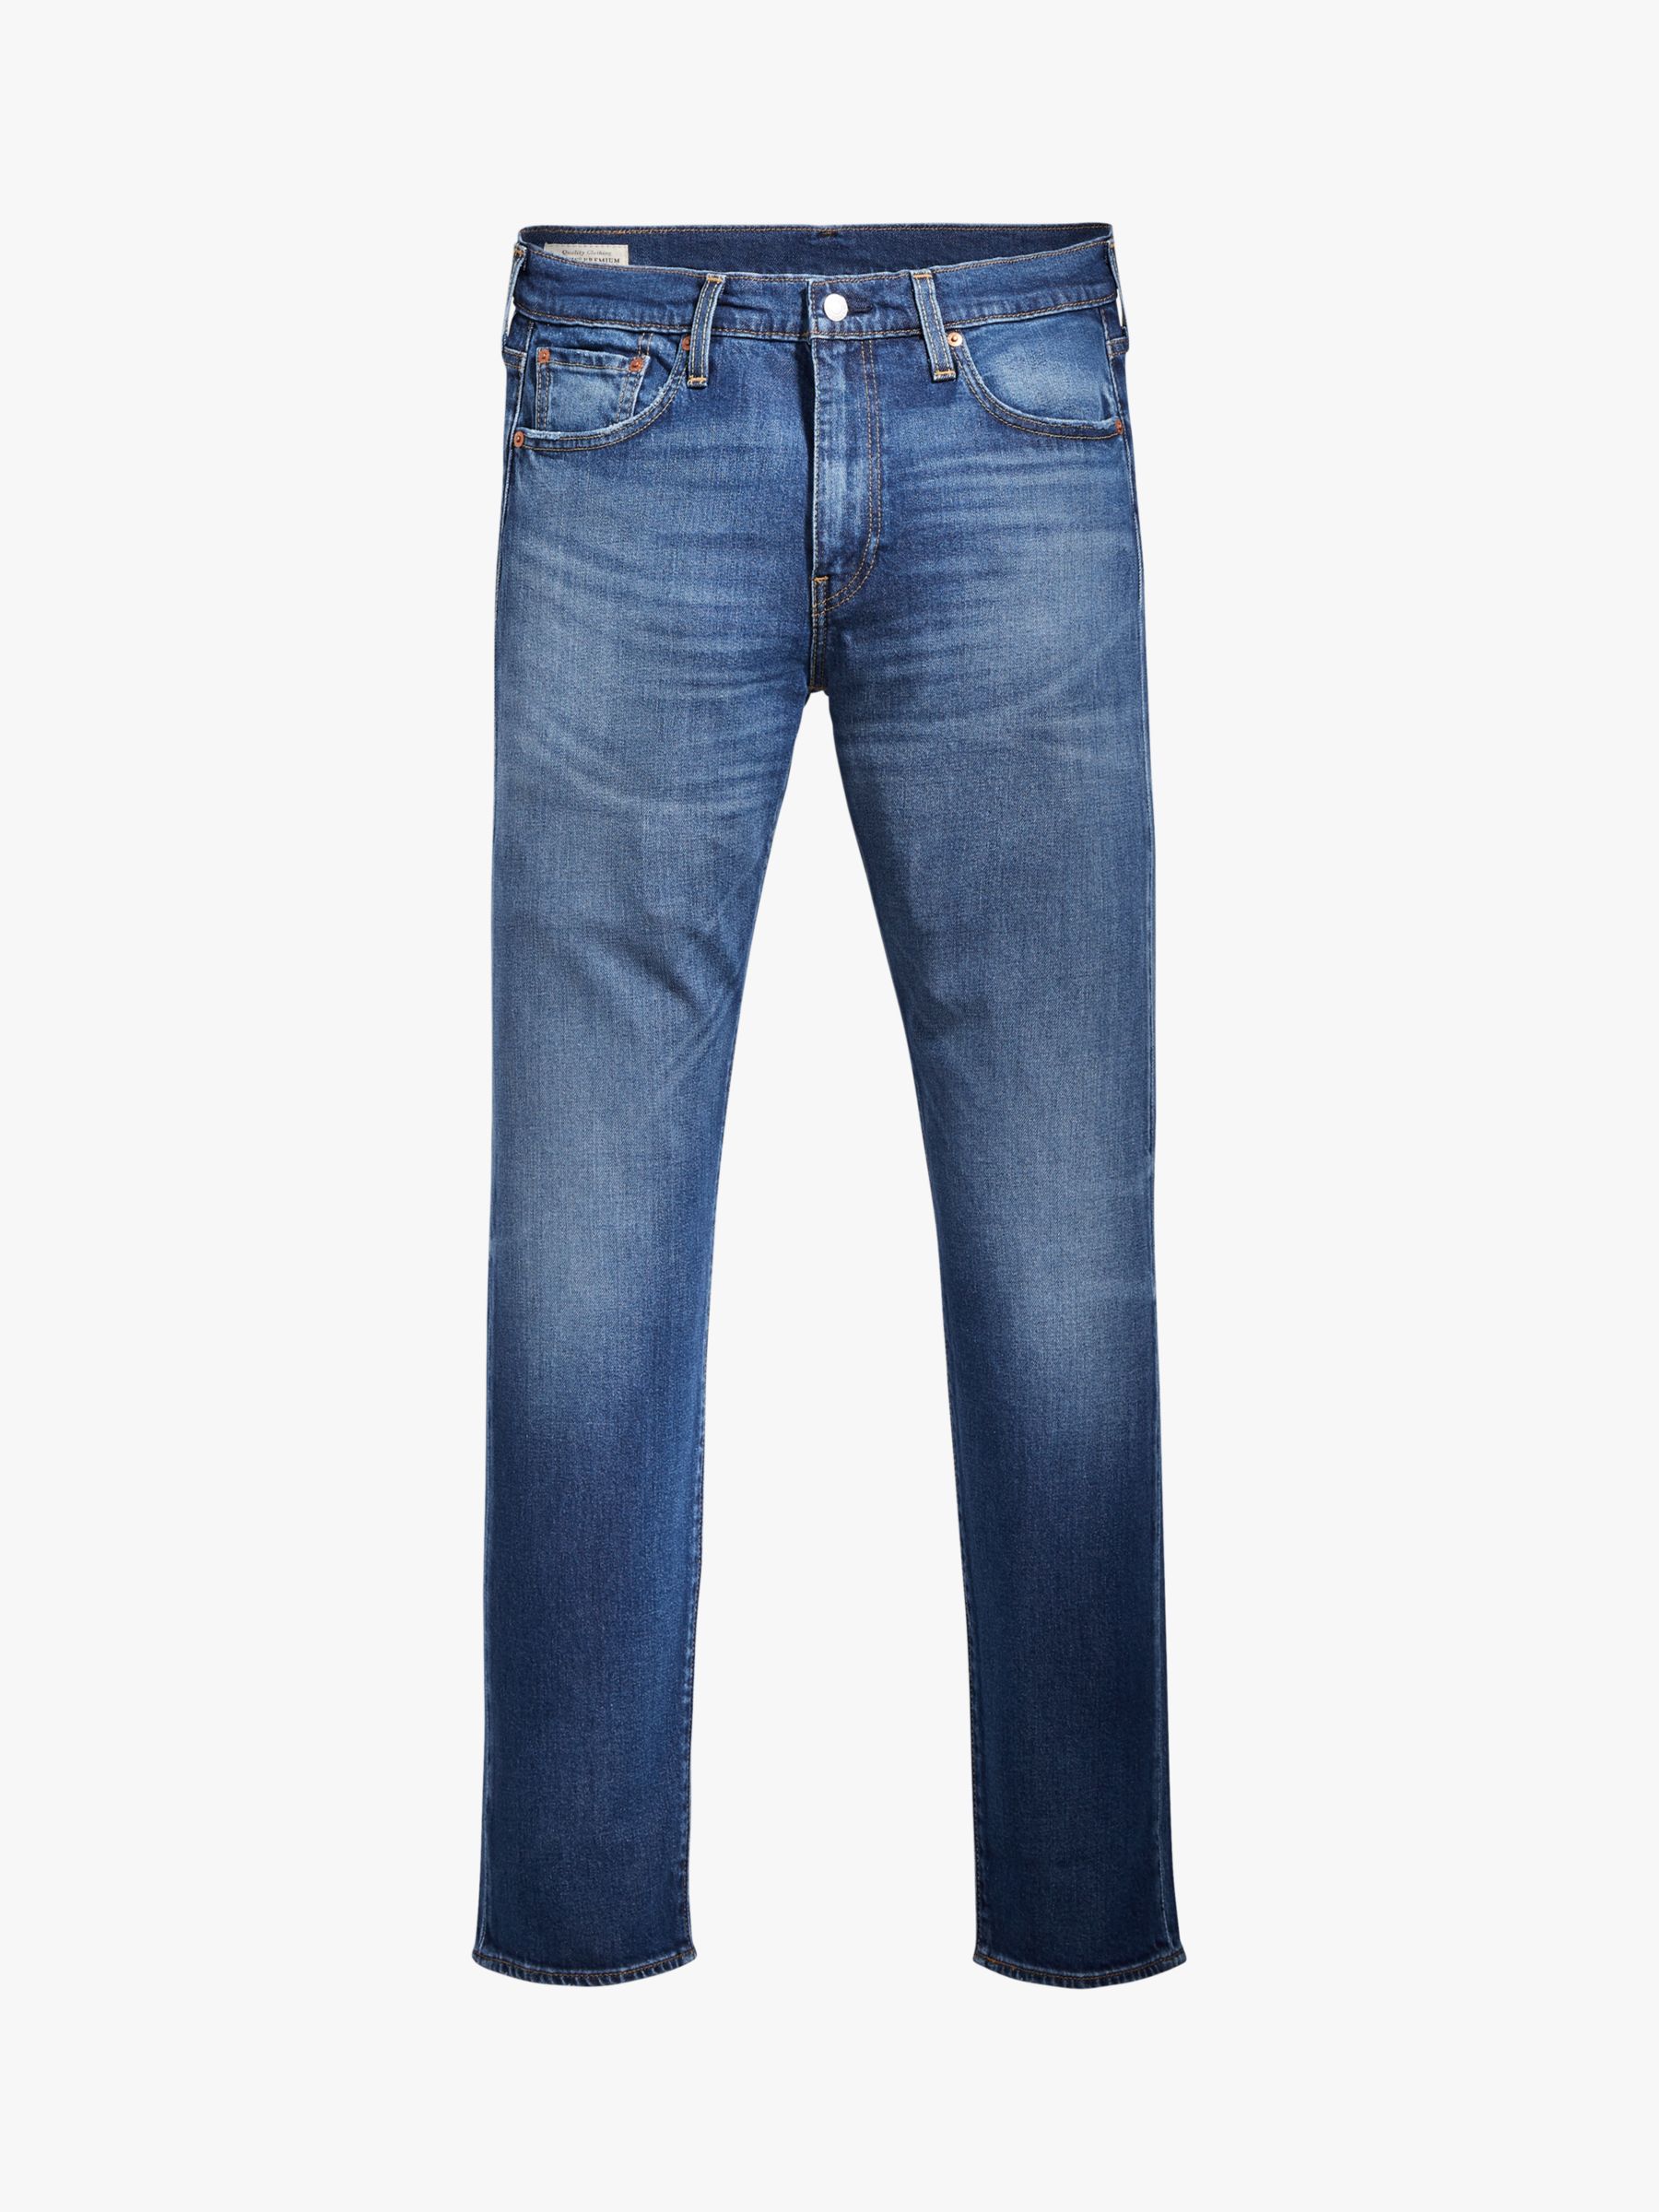 Levi's 502 Tapered Fit Jeans, Smoke Stacked Adv